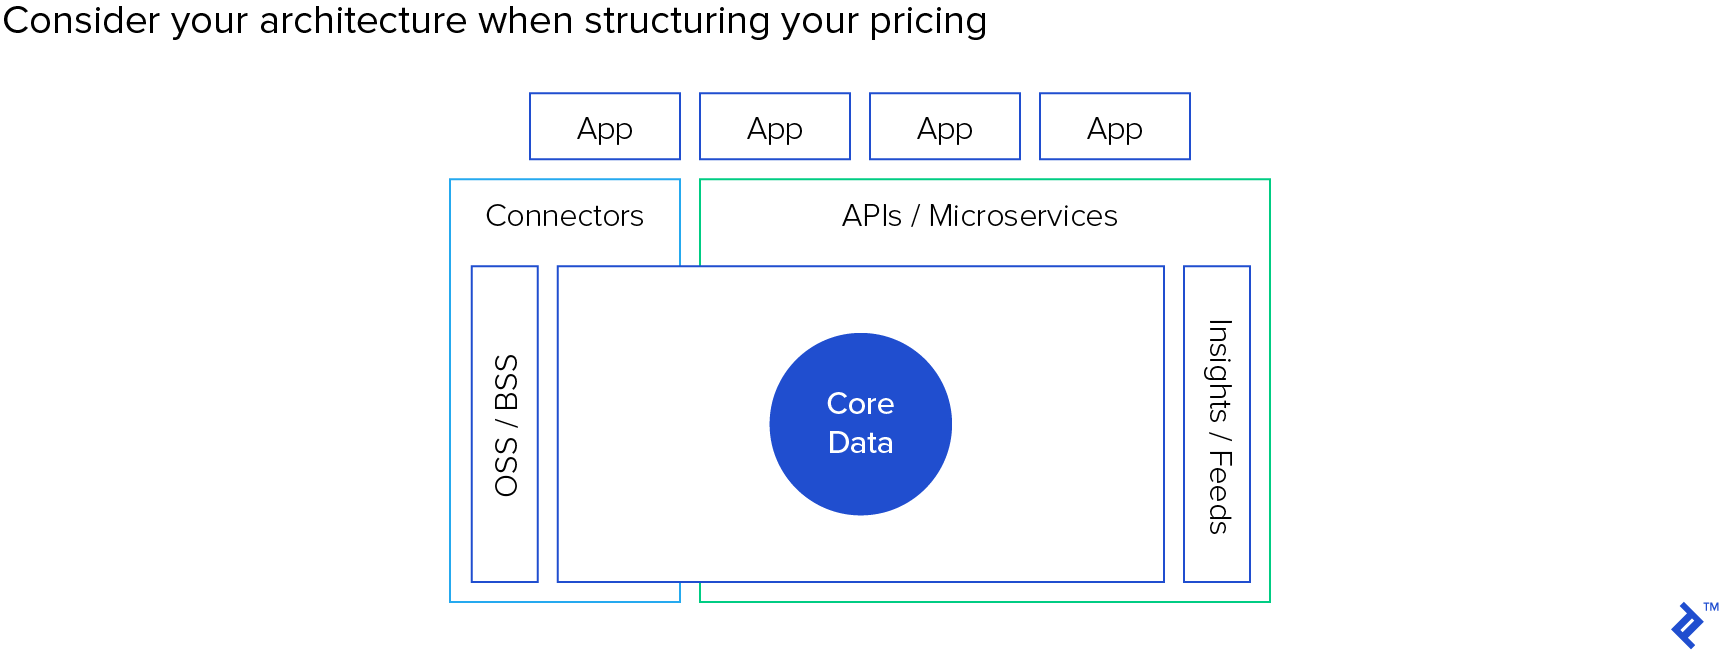 Consider your architecture when structuring your pricing